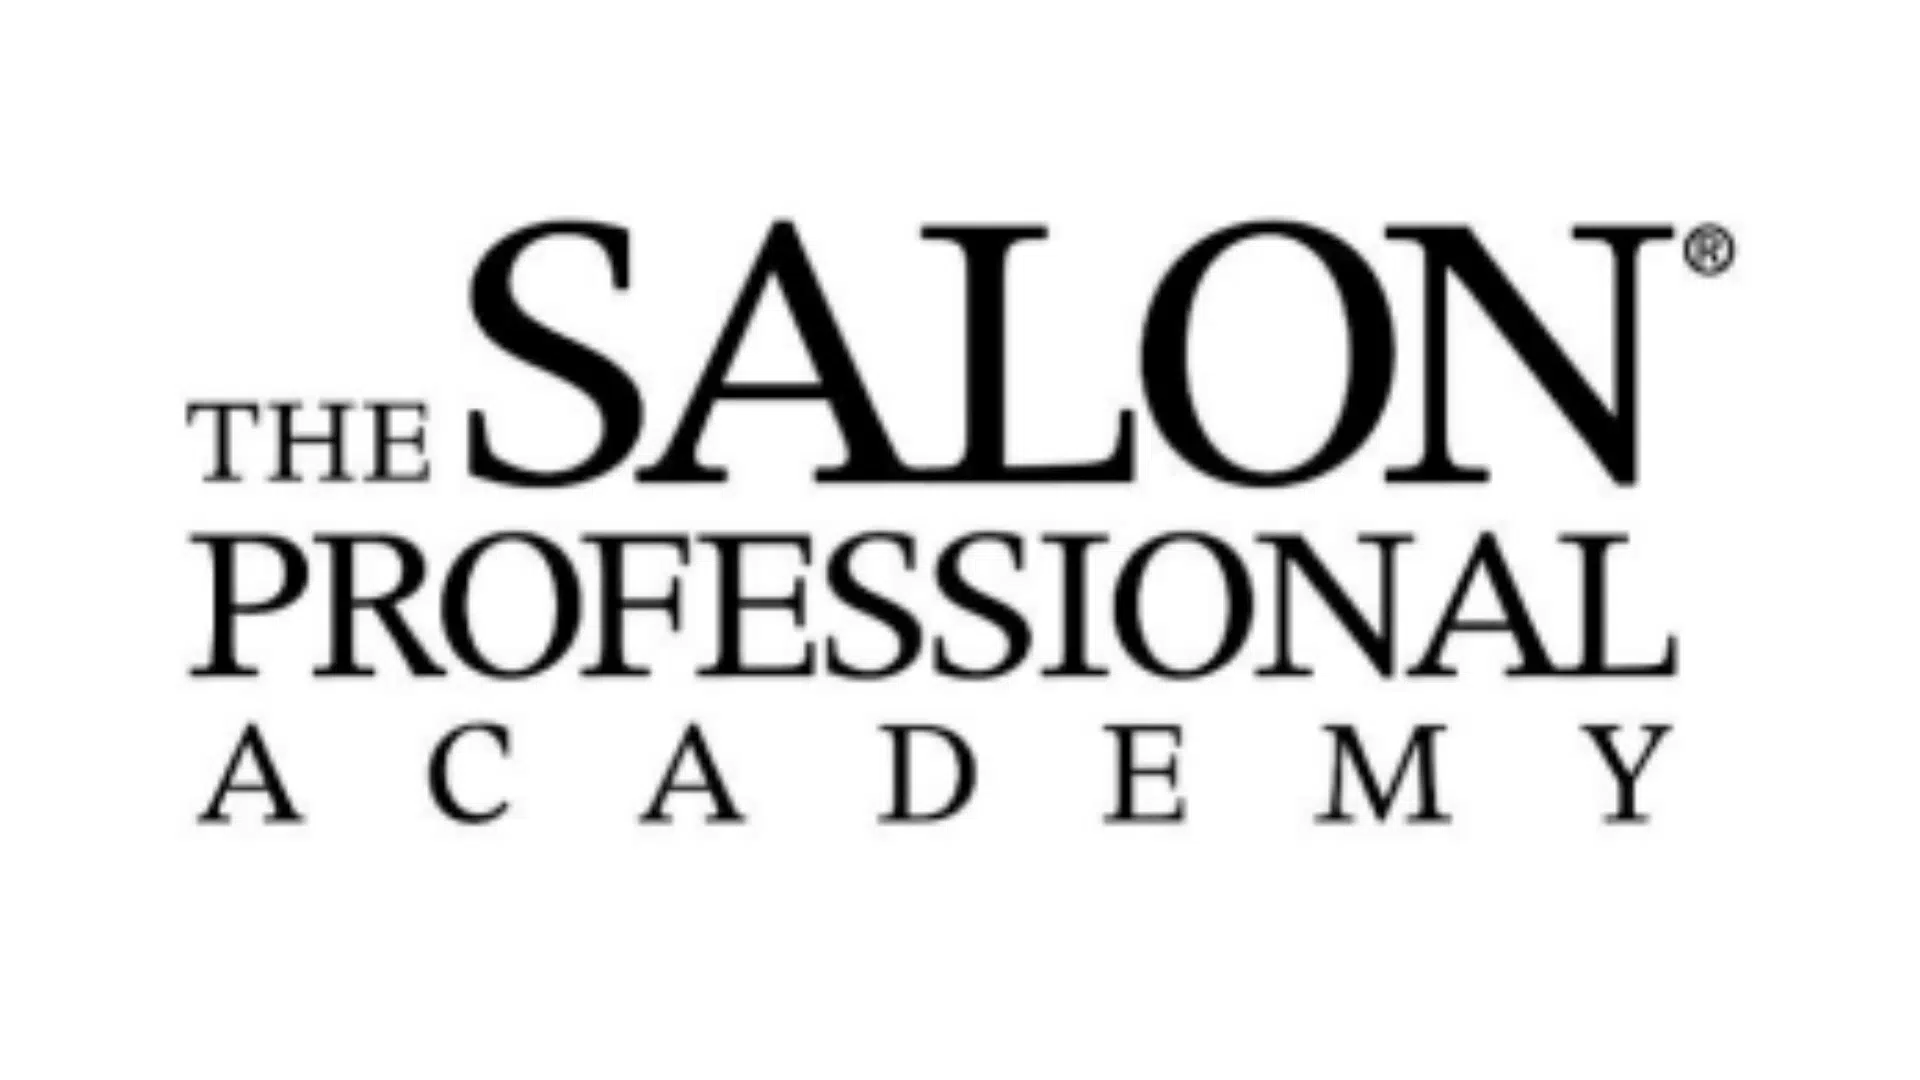 1. The Salon Professional Academy - wide 1